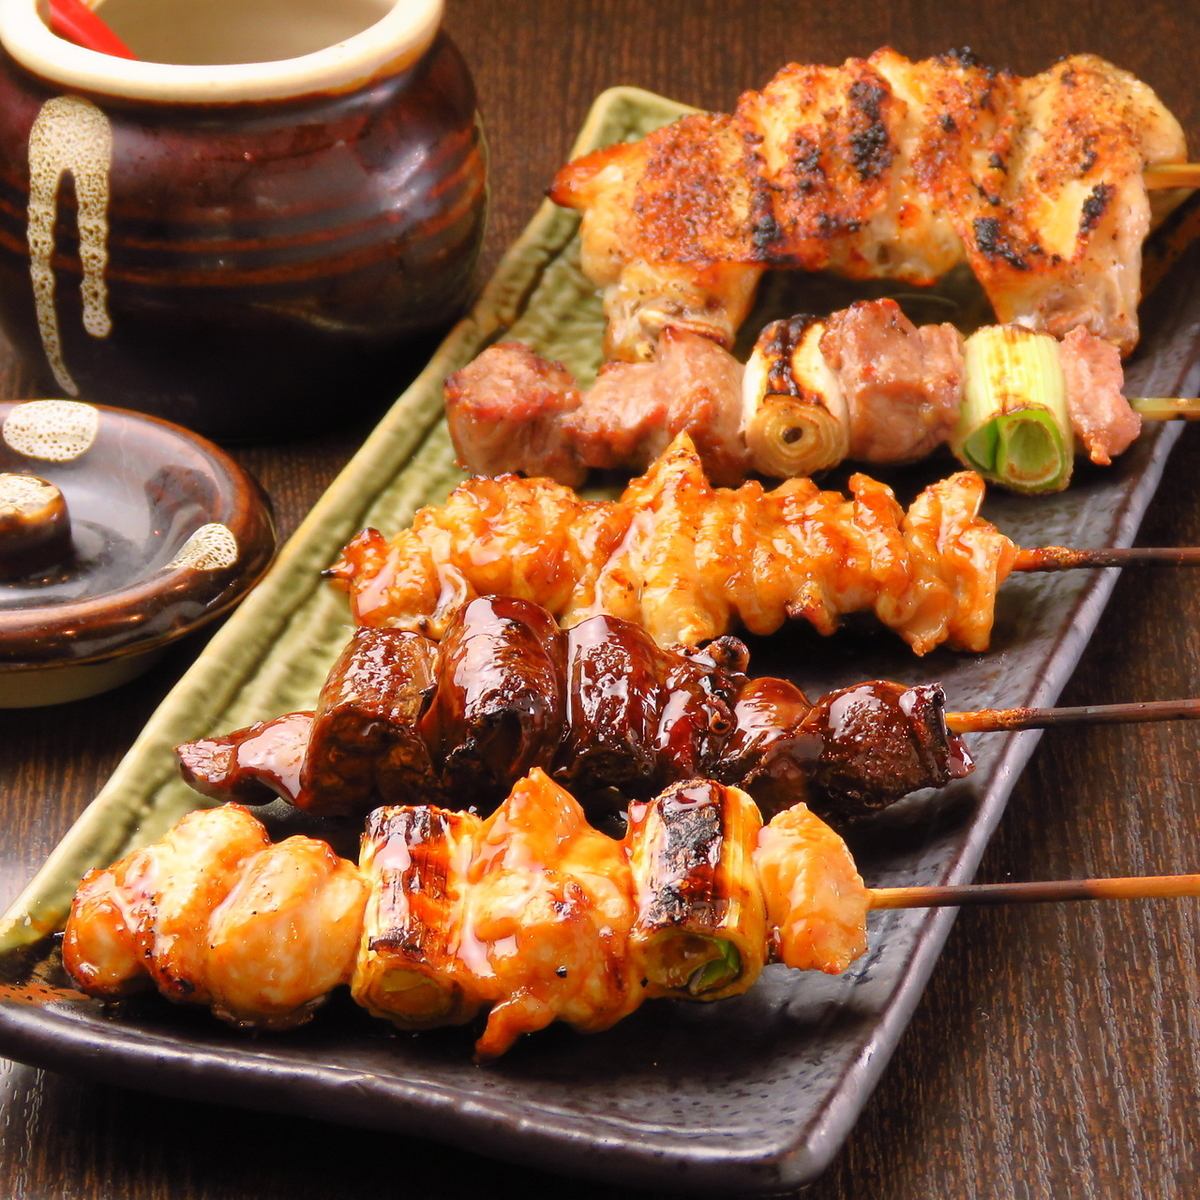 Yakitori starts from 220 yen! Enjoy delicious meat at a great value!